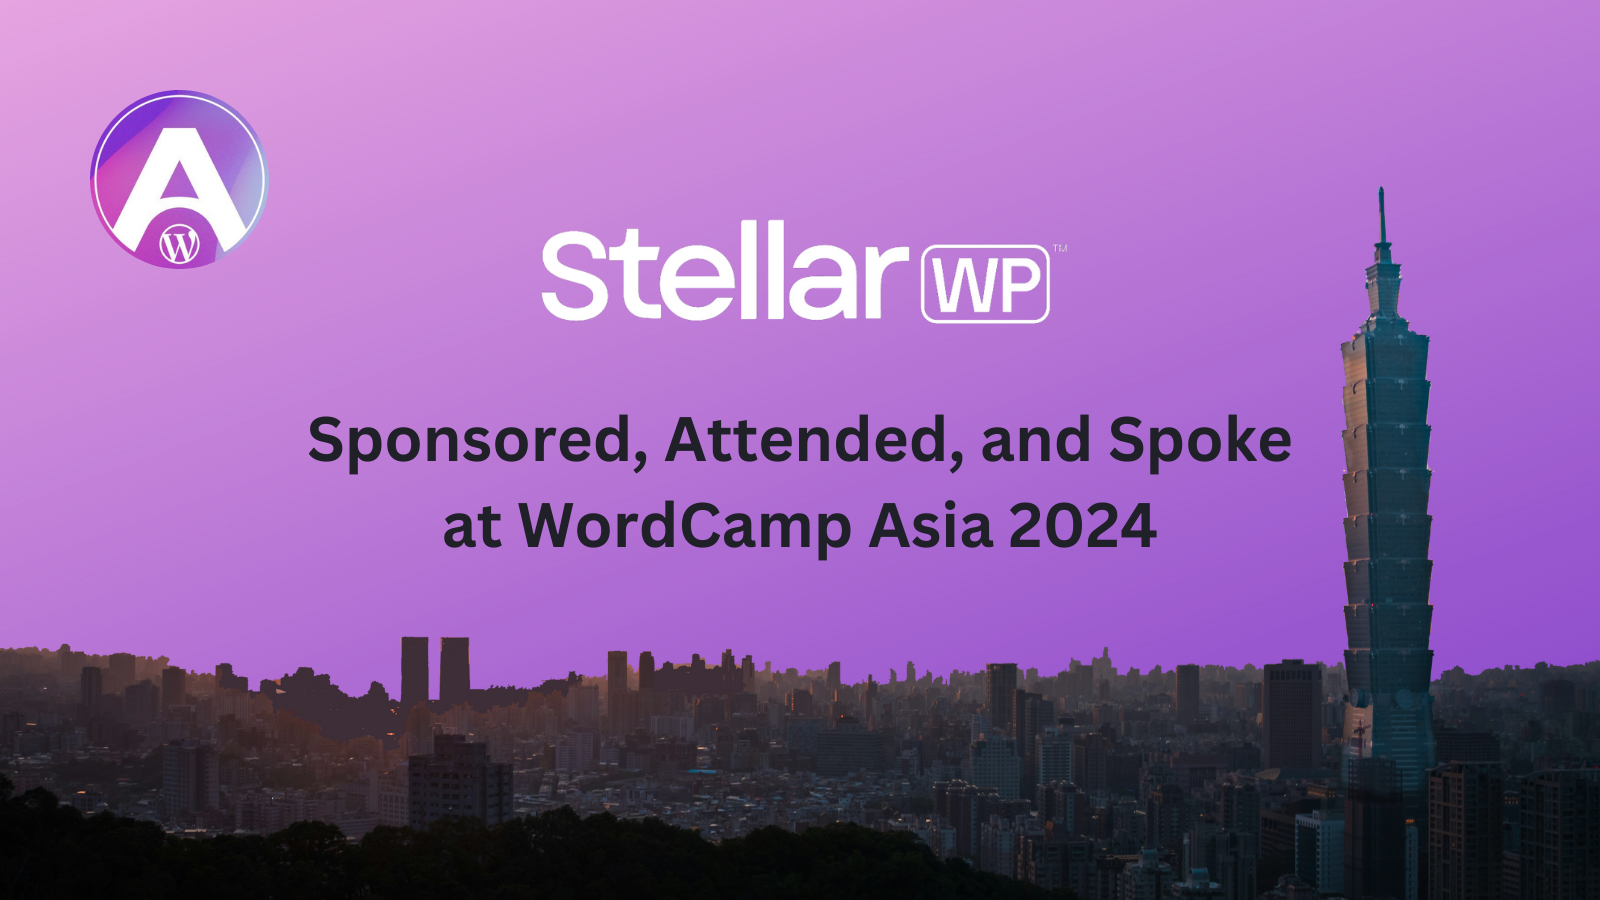 StellarWP sponsored, attended, and spoke at WordCamp Asia